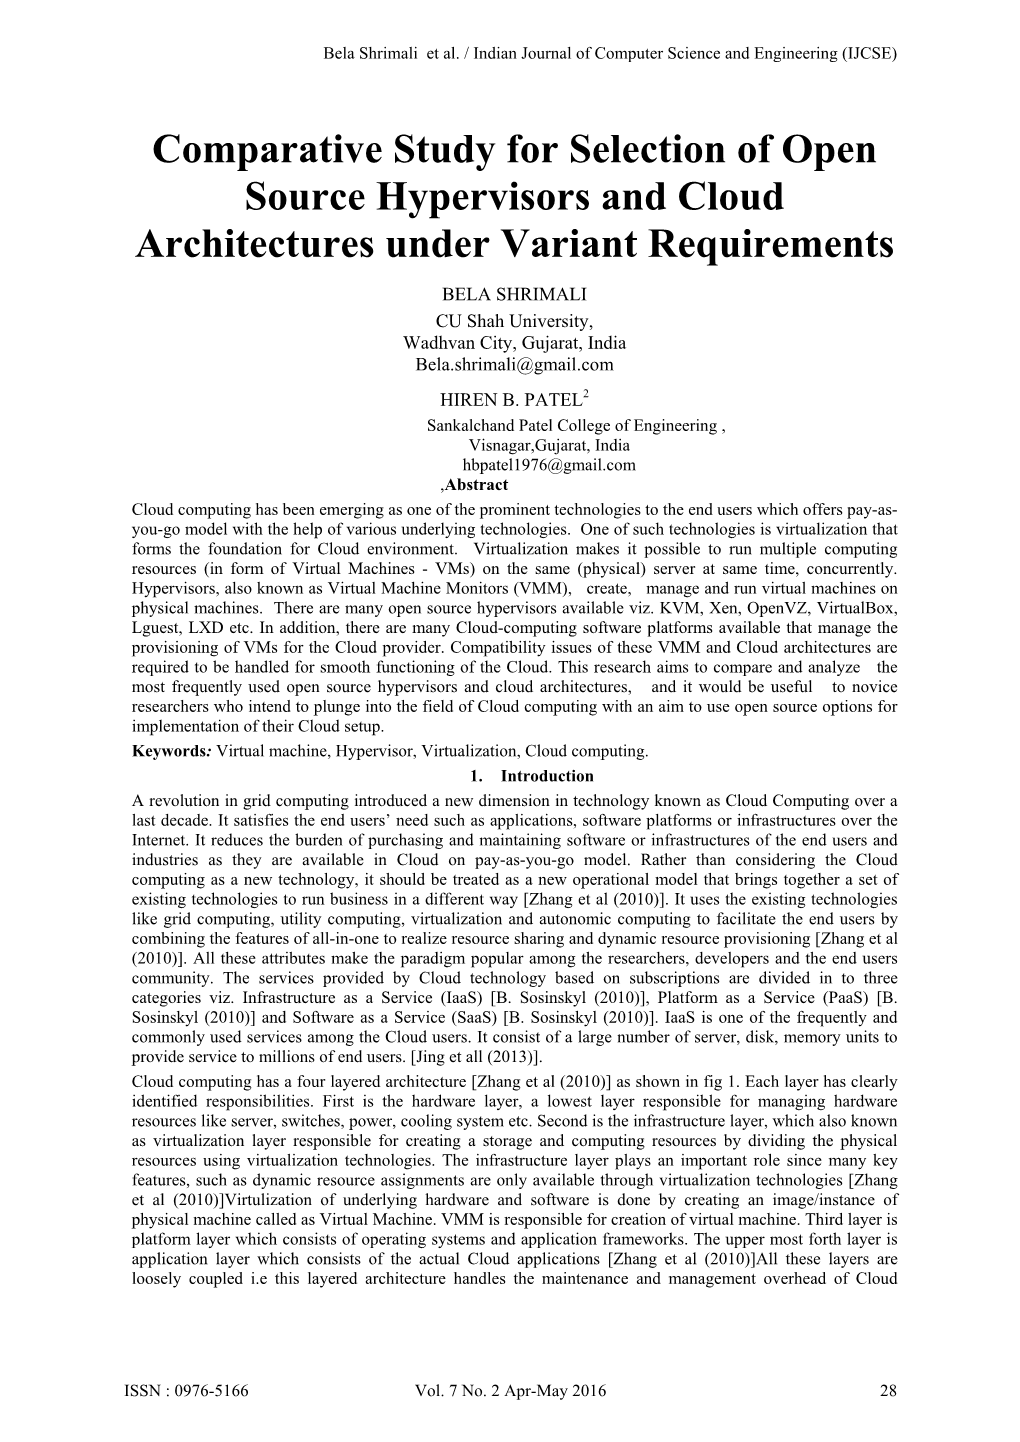 Comparative Study for Selection of Open Source Hypervisors and Cloud Architectures Under Variant Requirements